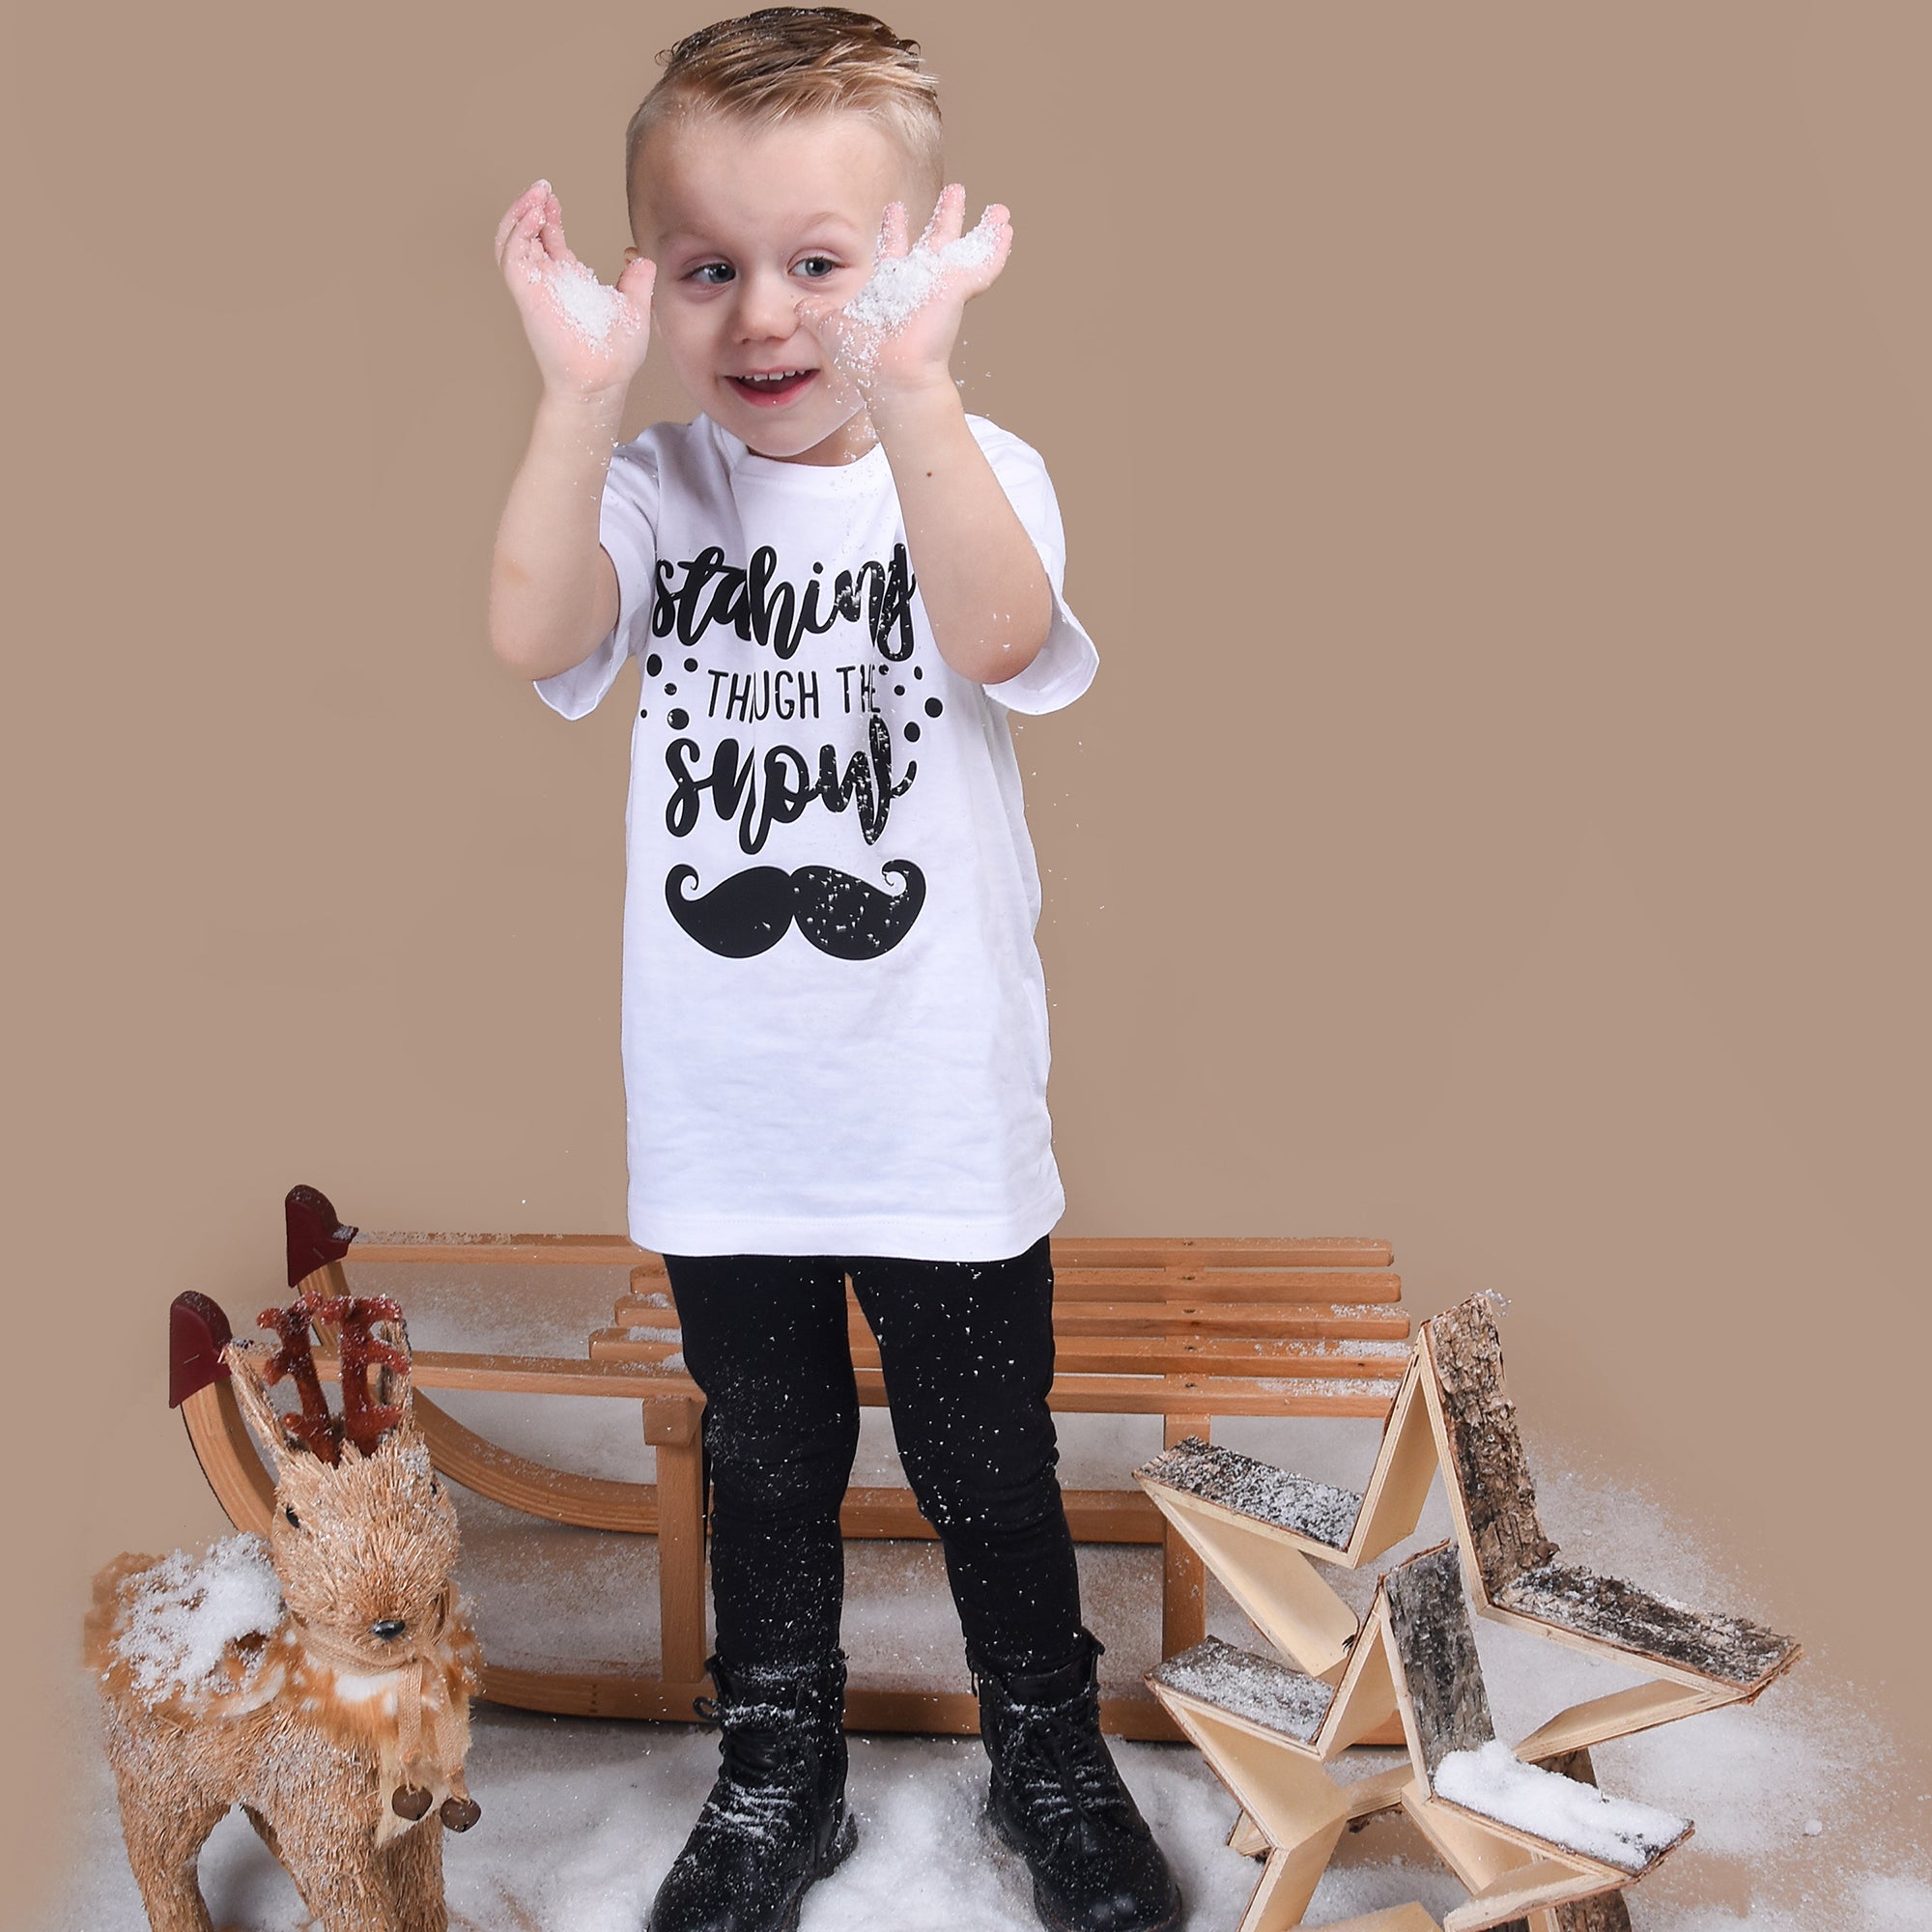 Blonde boy playing with snow, wearing white shirt with 'Staching through the snow' print by KMLeon.